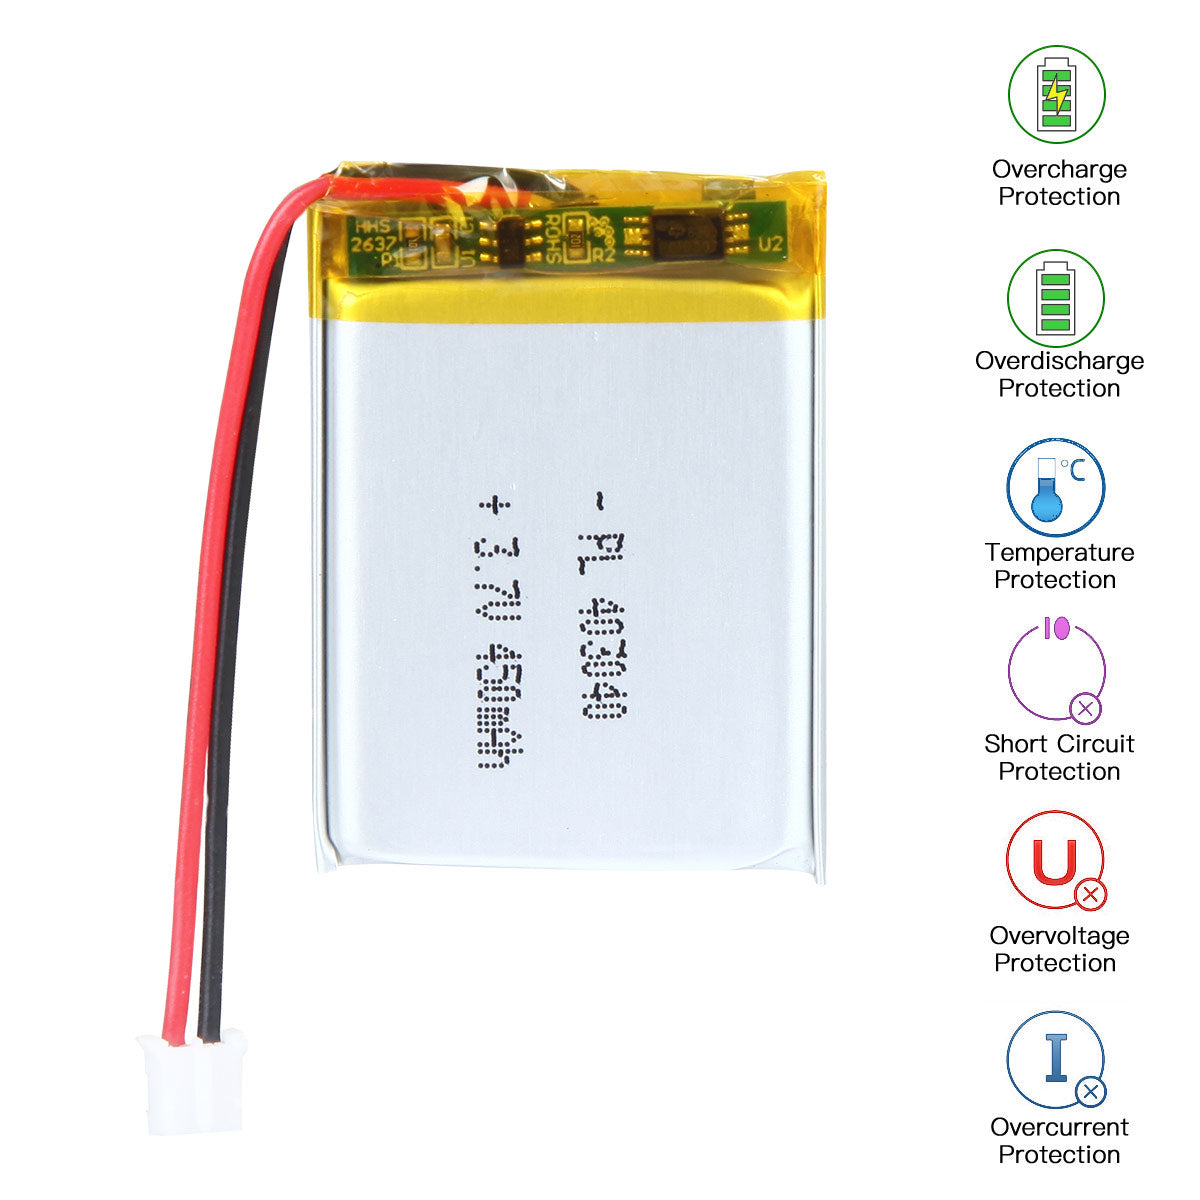 YDL 3.7V 450mAh 403040 Rechargeable Lithium Polymer Battery Length 42mm